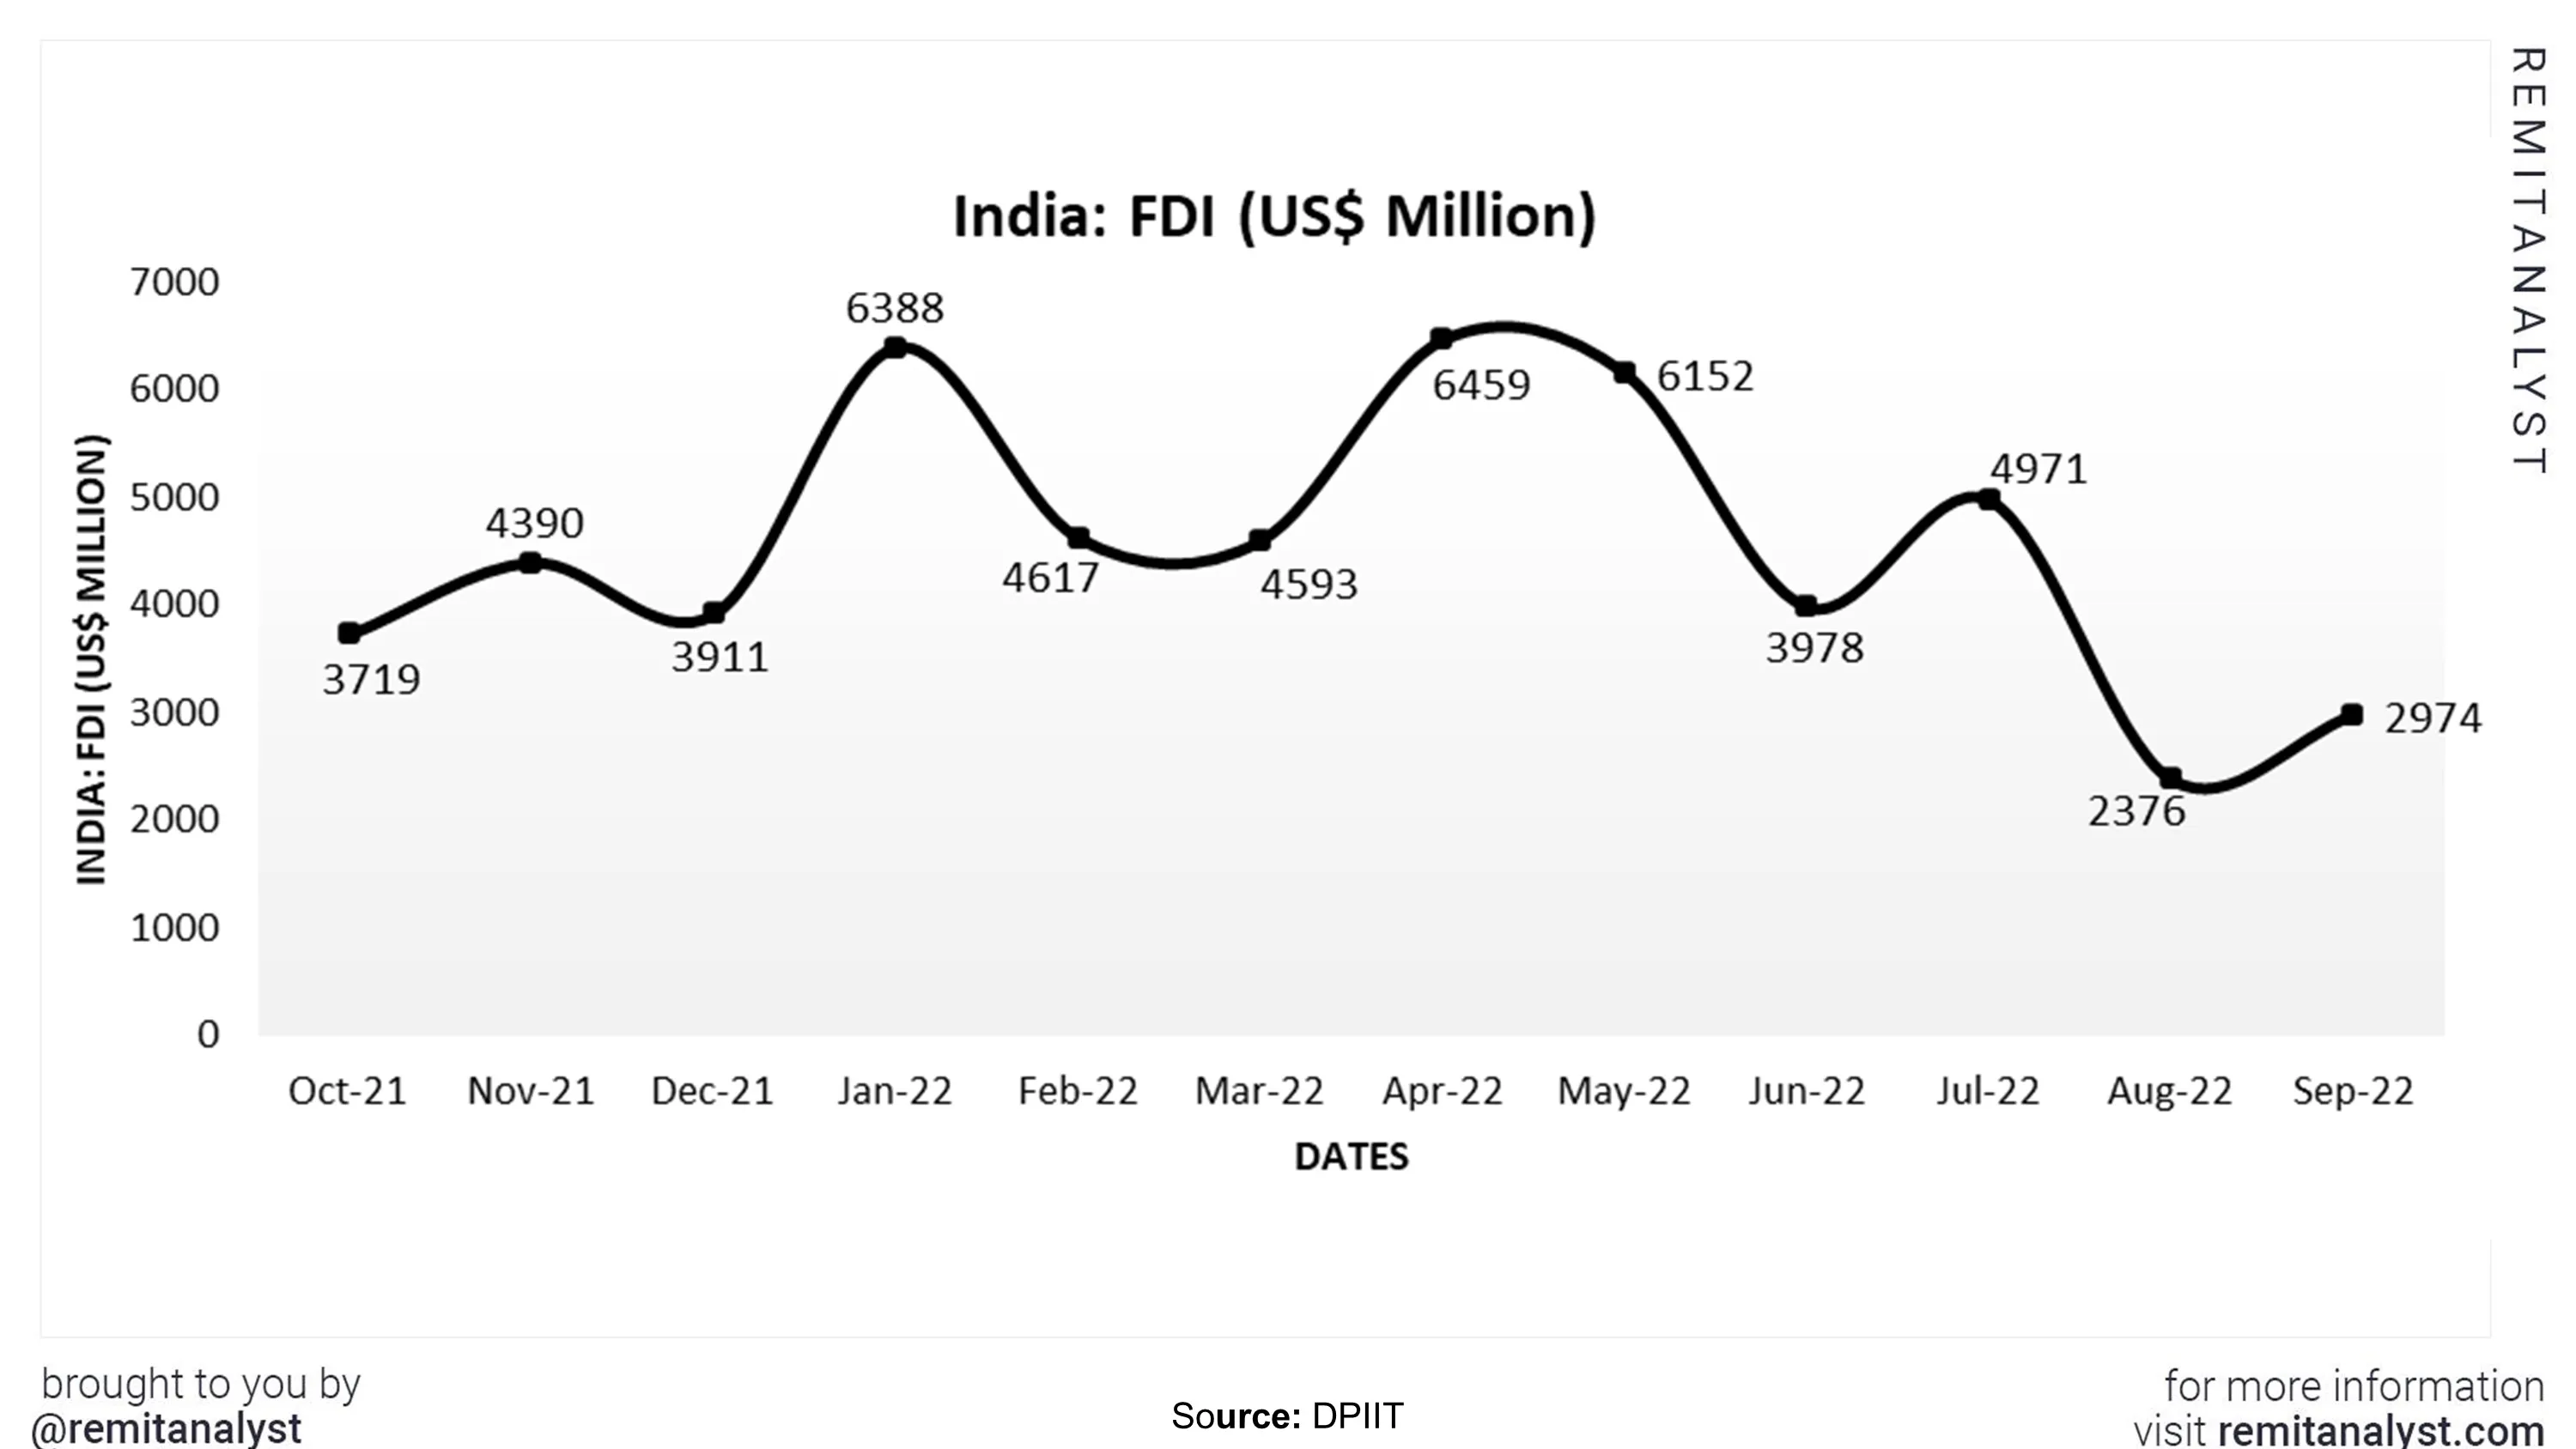 fdi-in-india-from-oct-2021-to-sep-2022